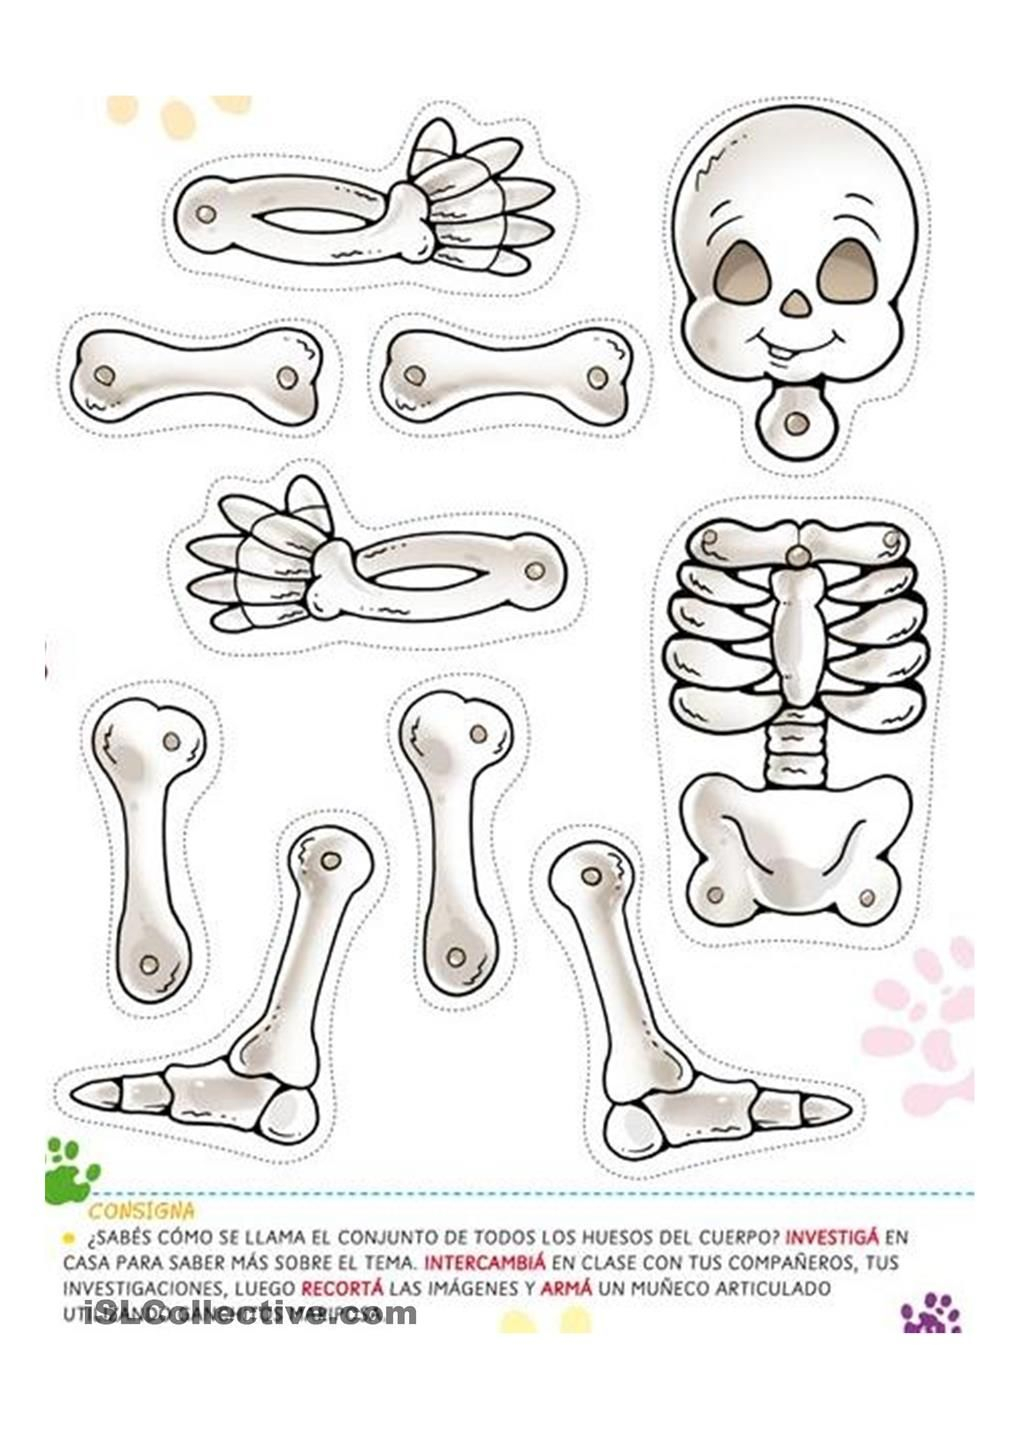 Body Crafts For Kids (4) | Crafts And Worksheets For